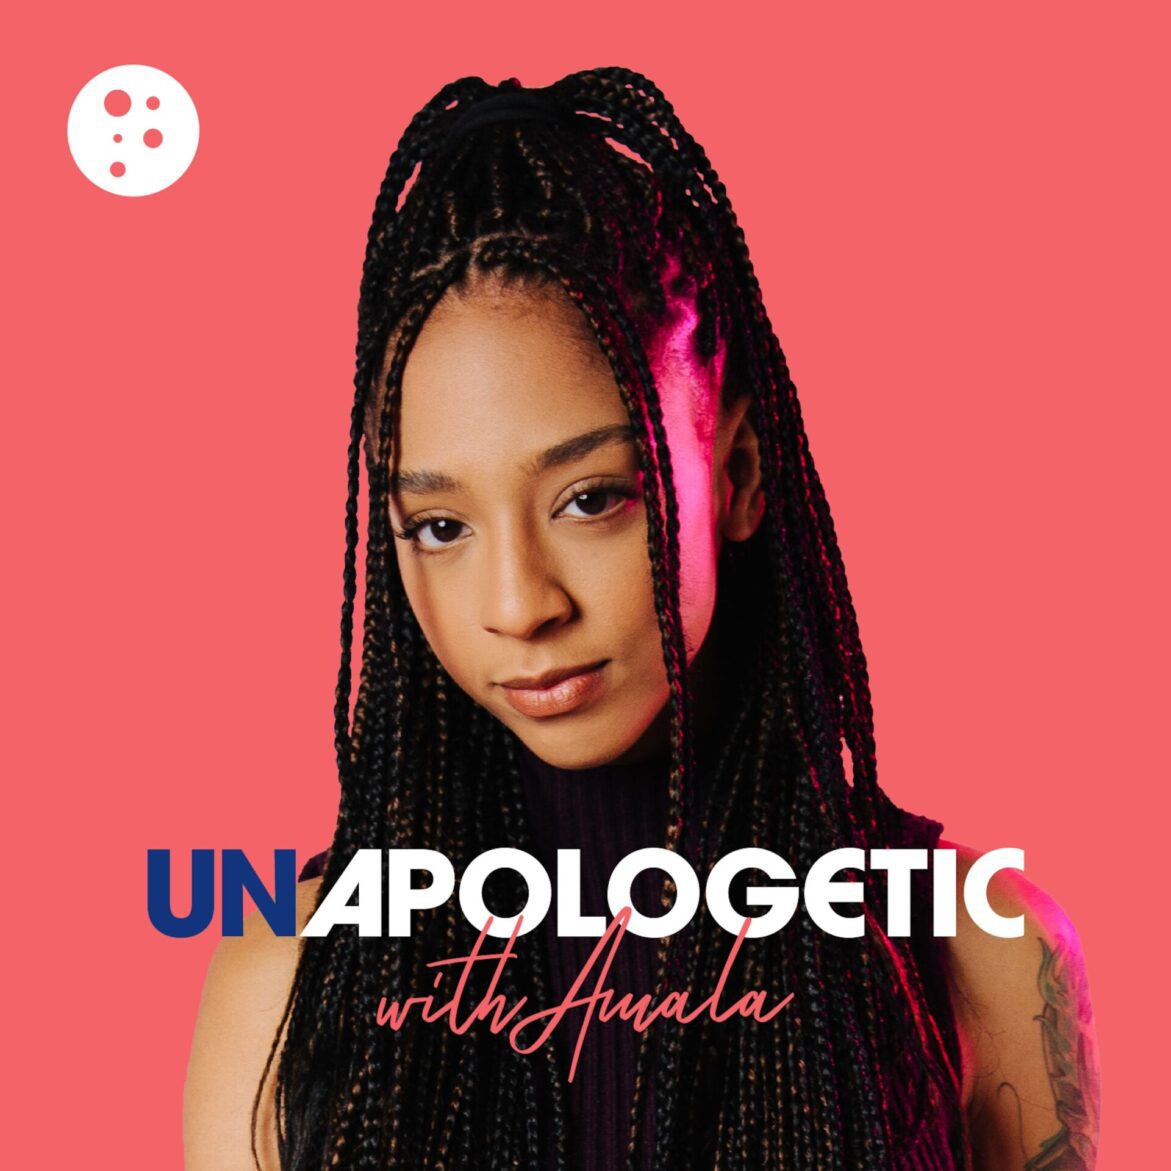 Black Podcasting - Twitter Takeover, Furry French Toast, and TikTok Thoughts - Unapologetic LIVE 10/28/22